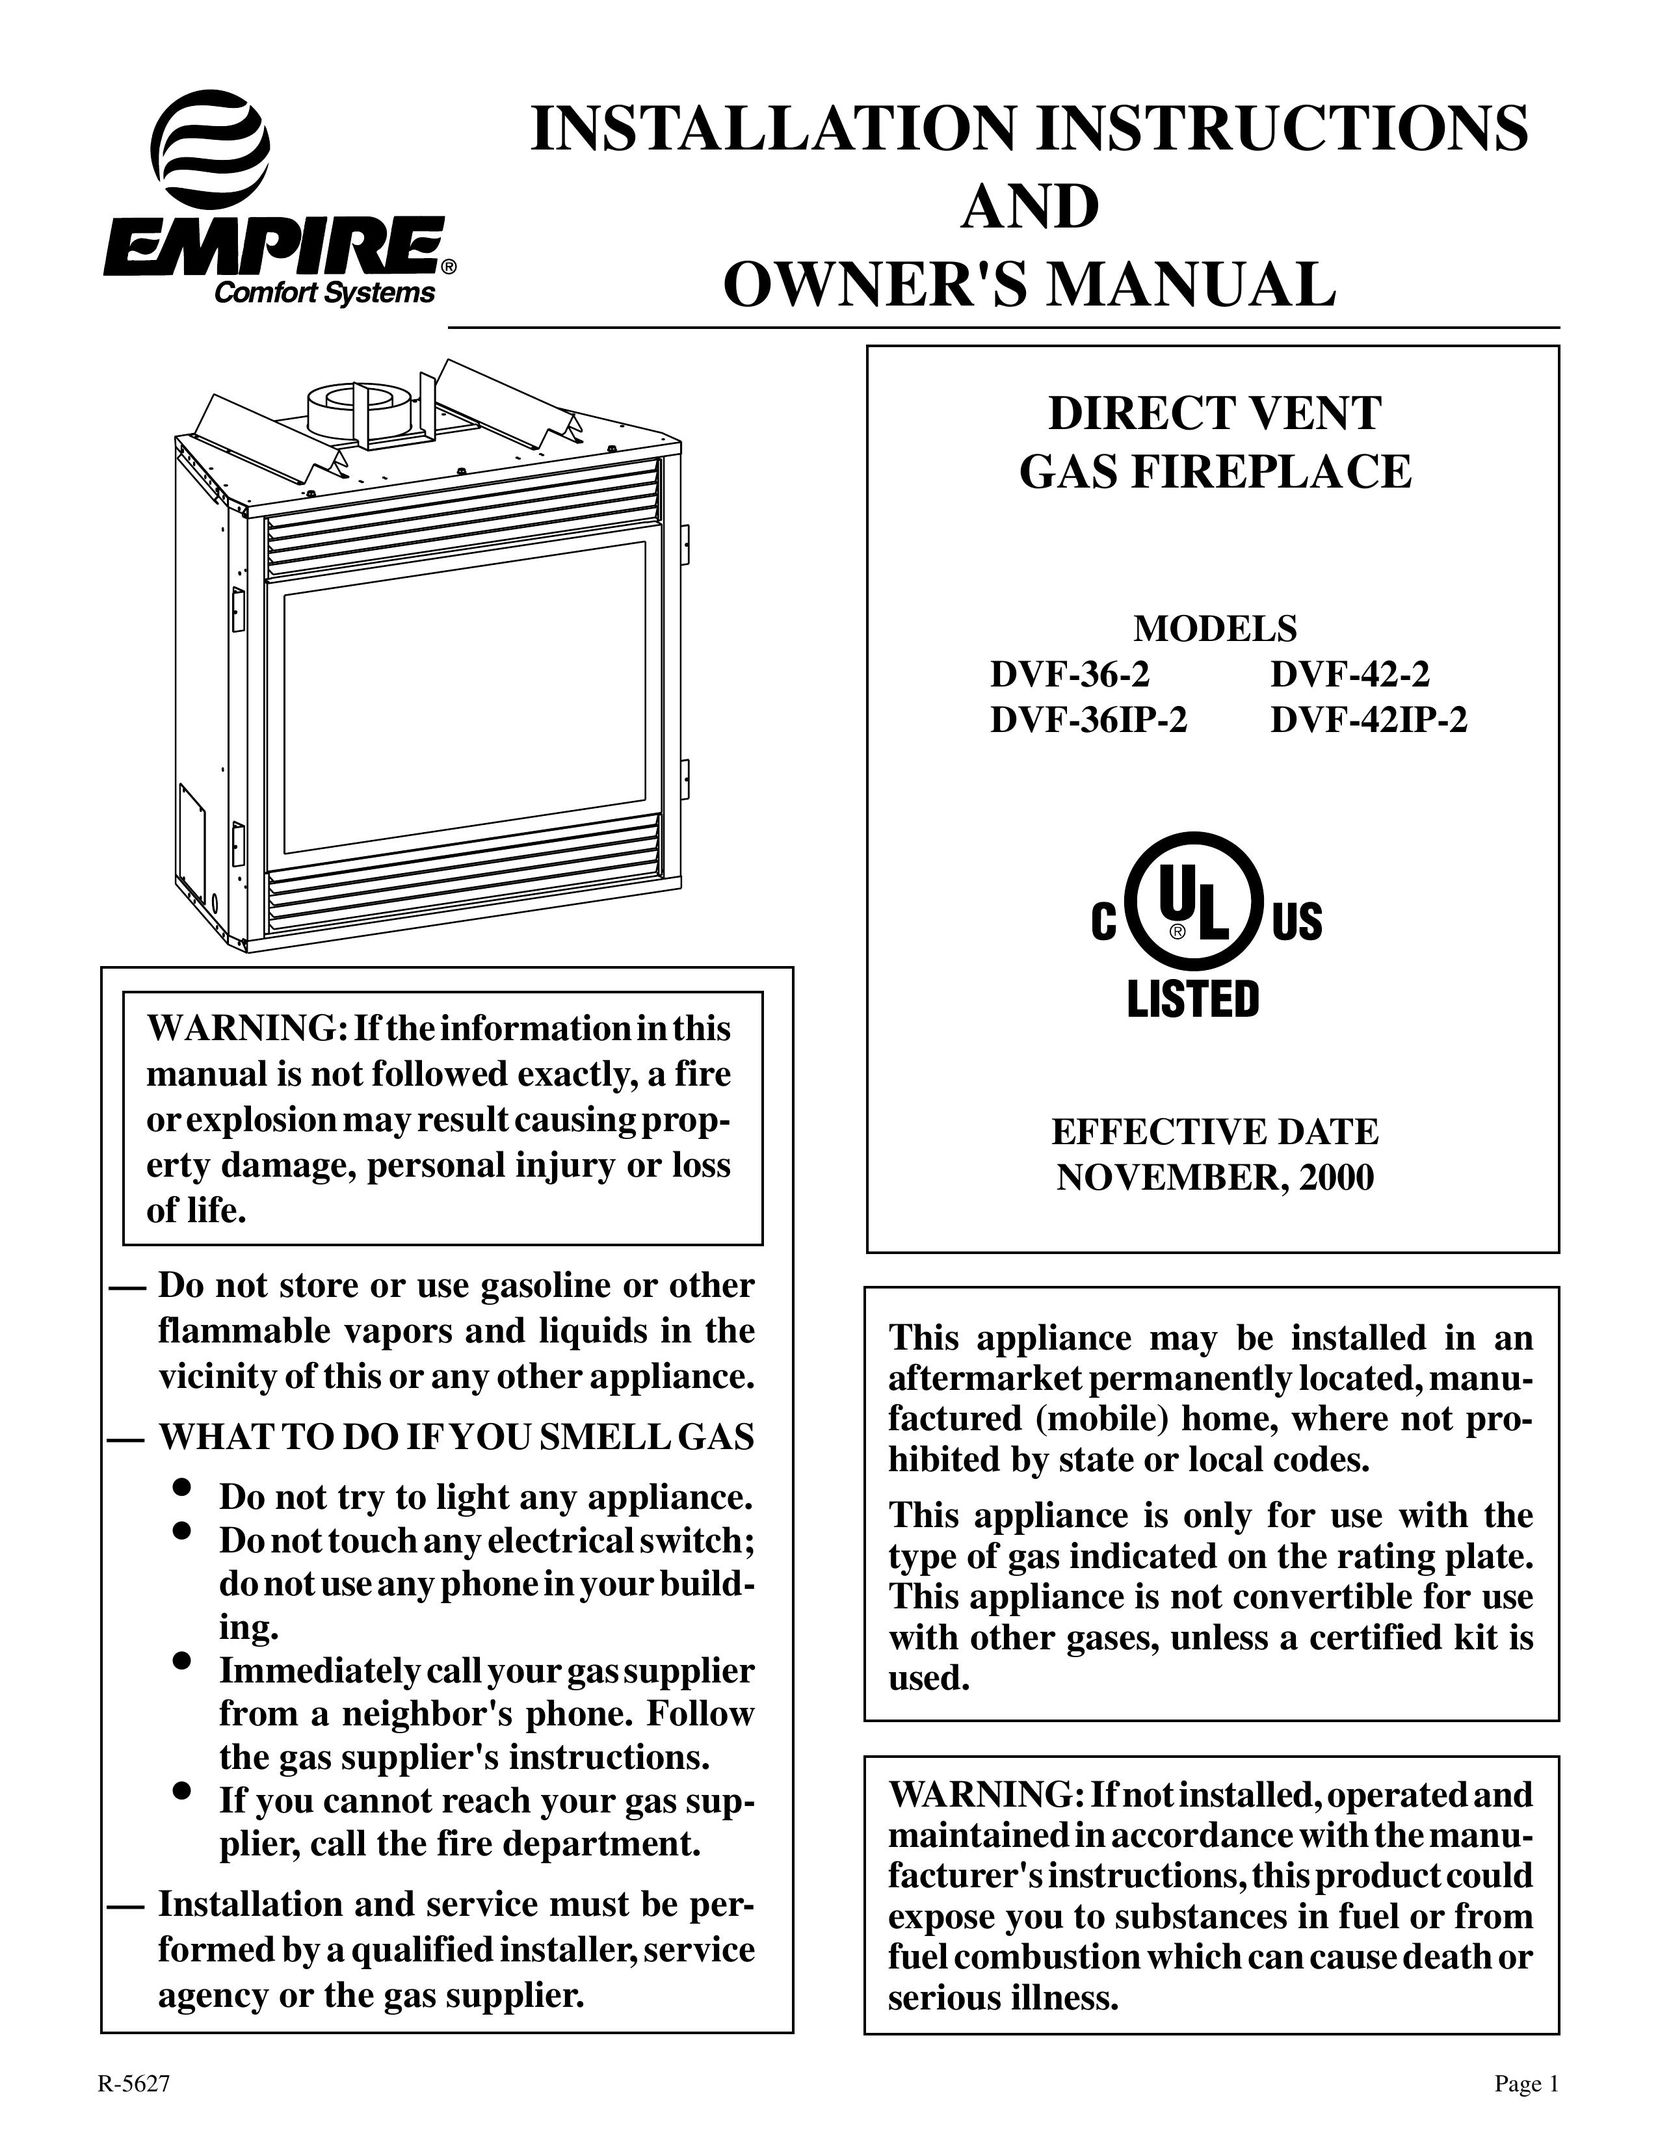 Empire Comfort Systems DVF-36IP-2 Indoor Fireplace User Manual